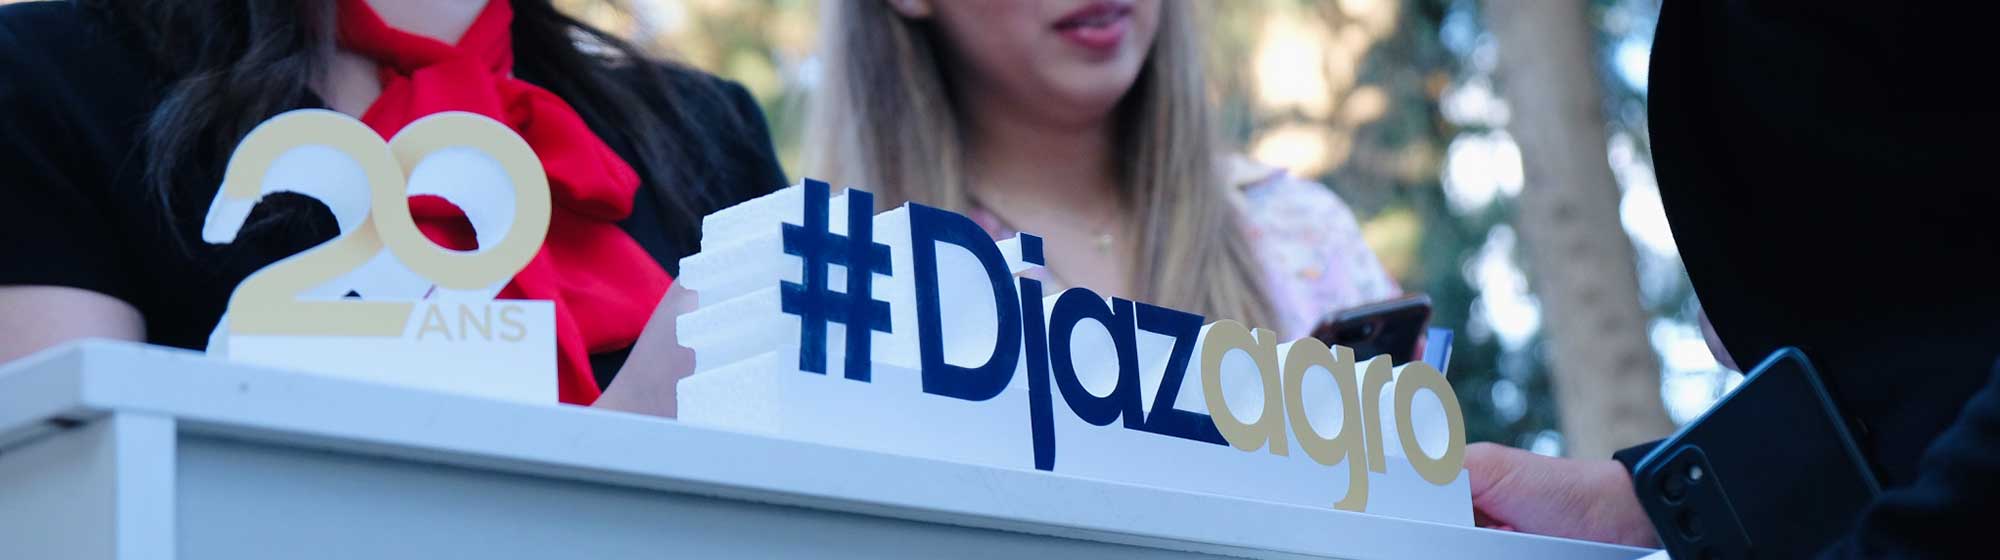 Two hostesses behind the Djazagro 20th edition logo